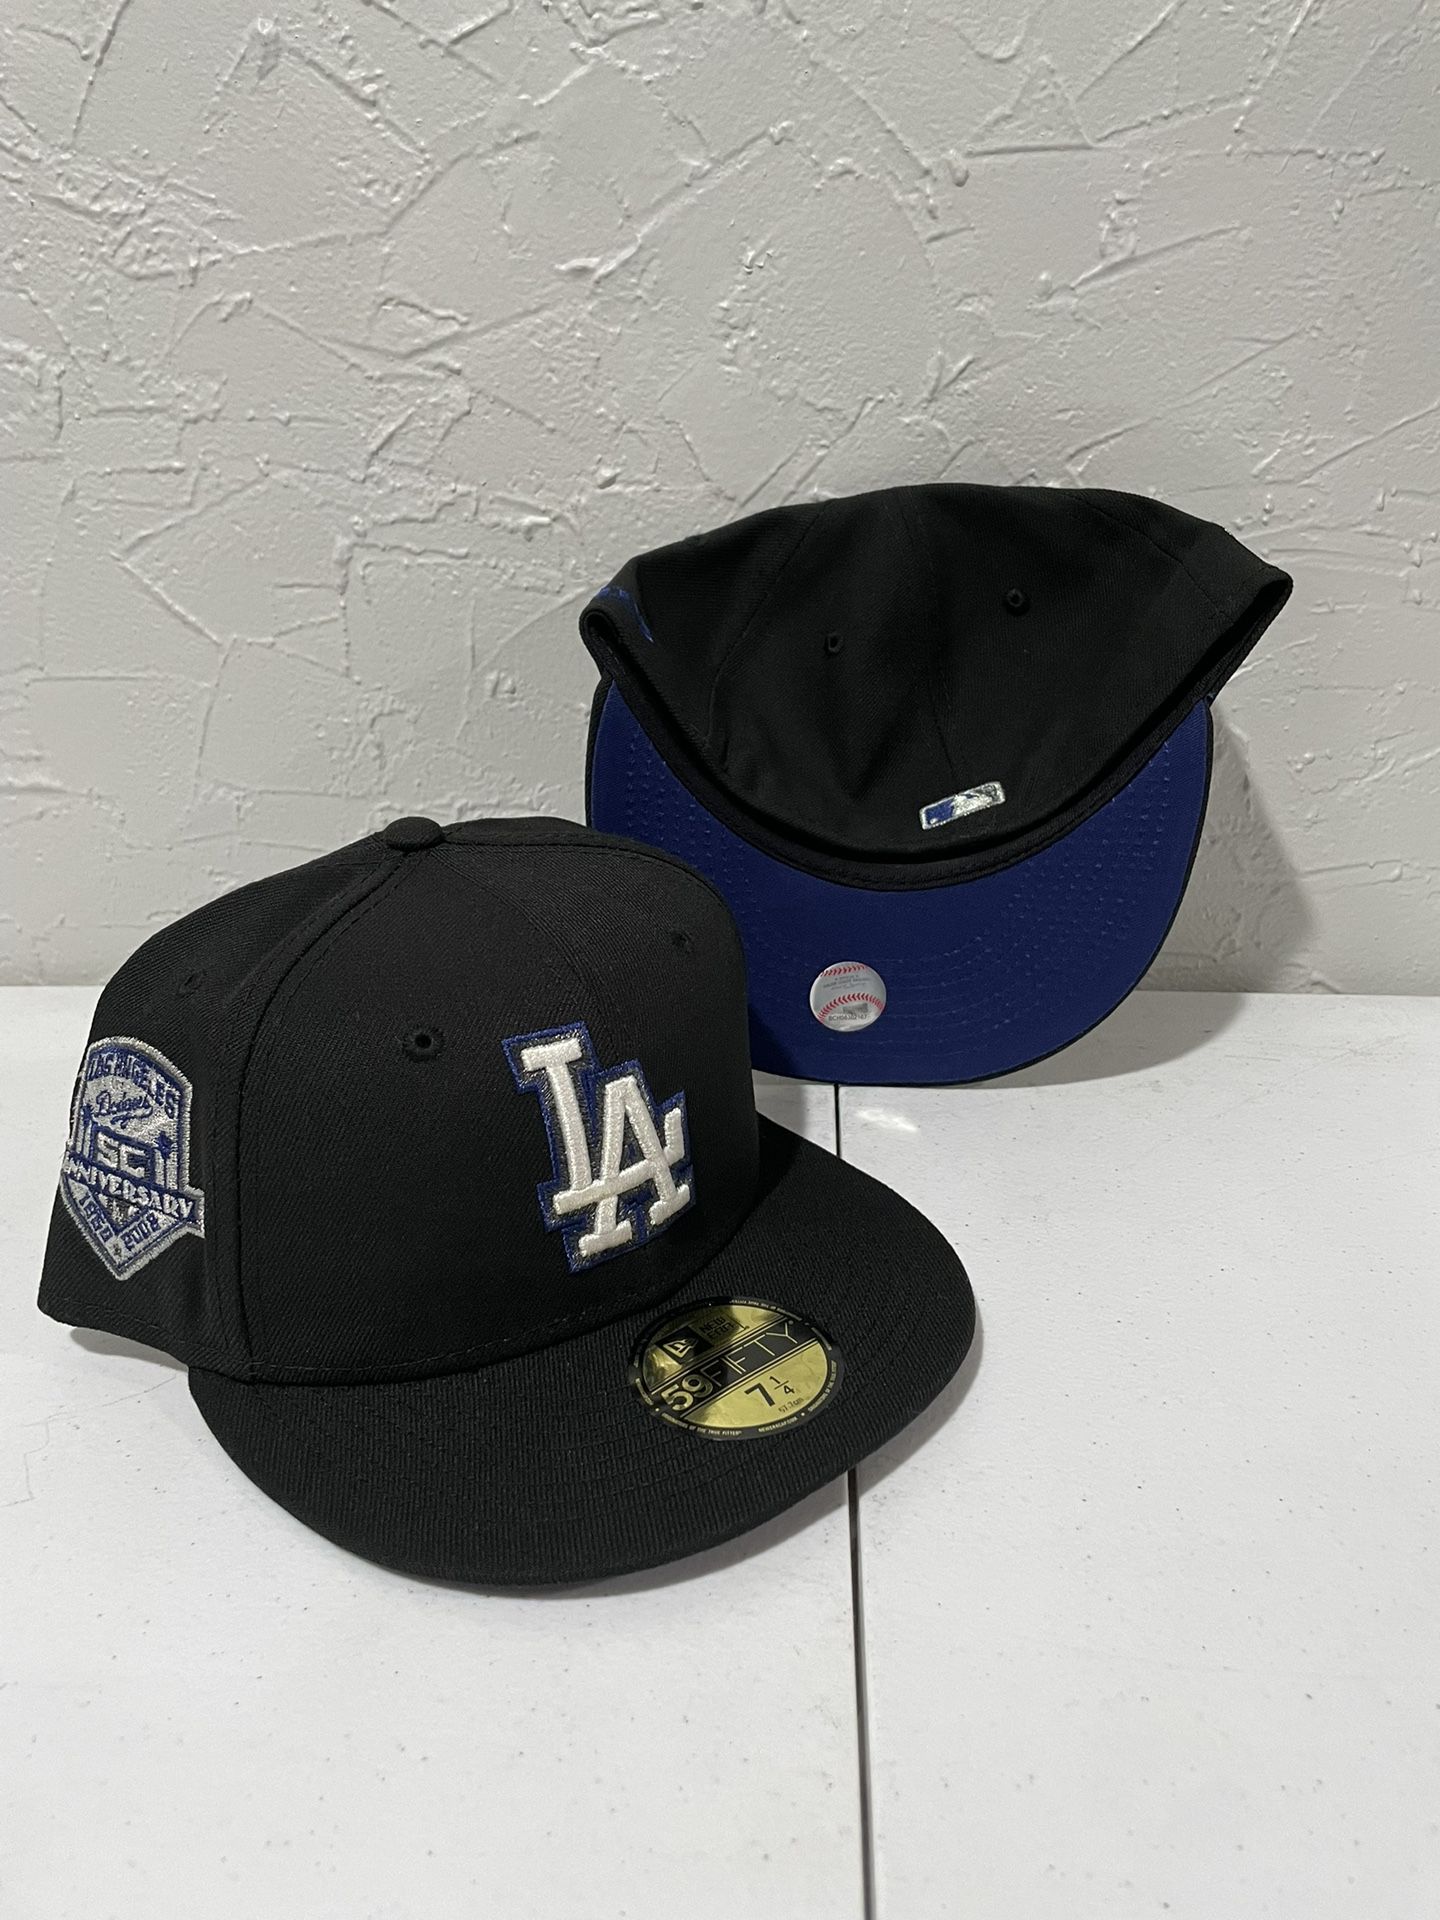 blue fitted hats